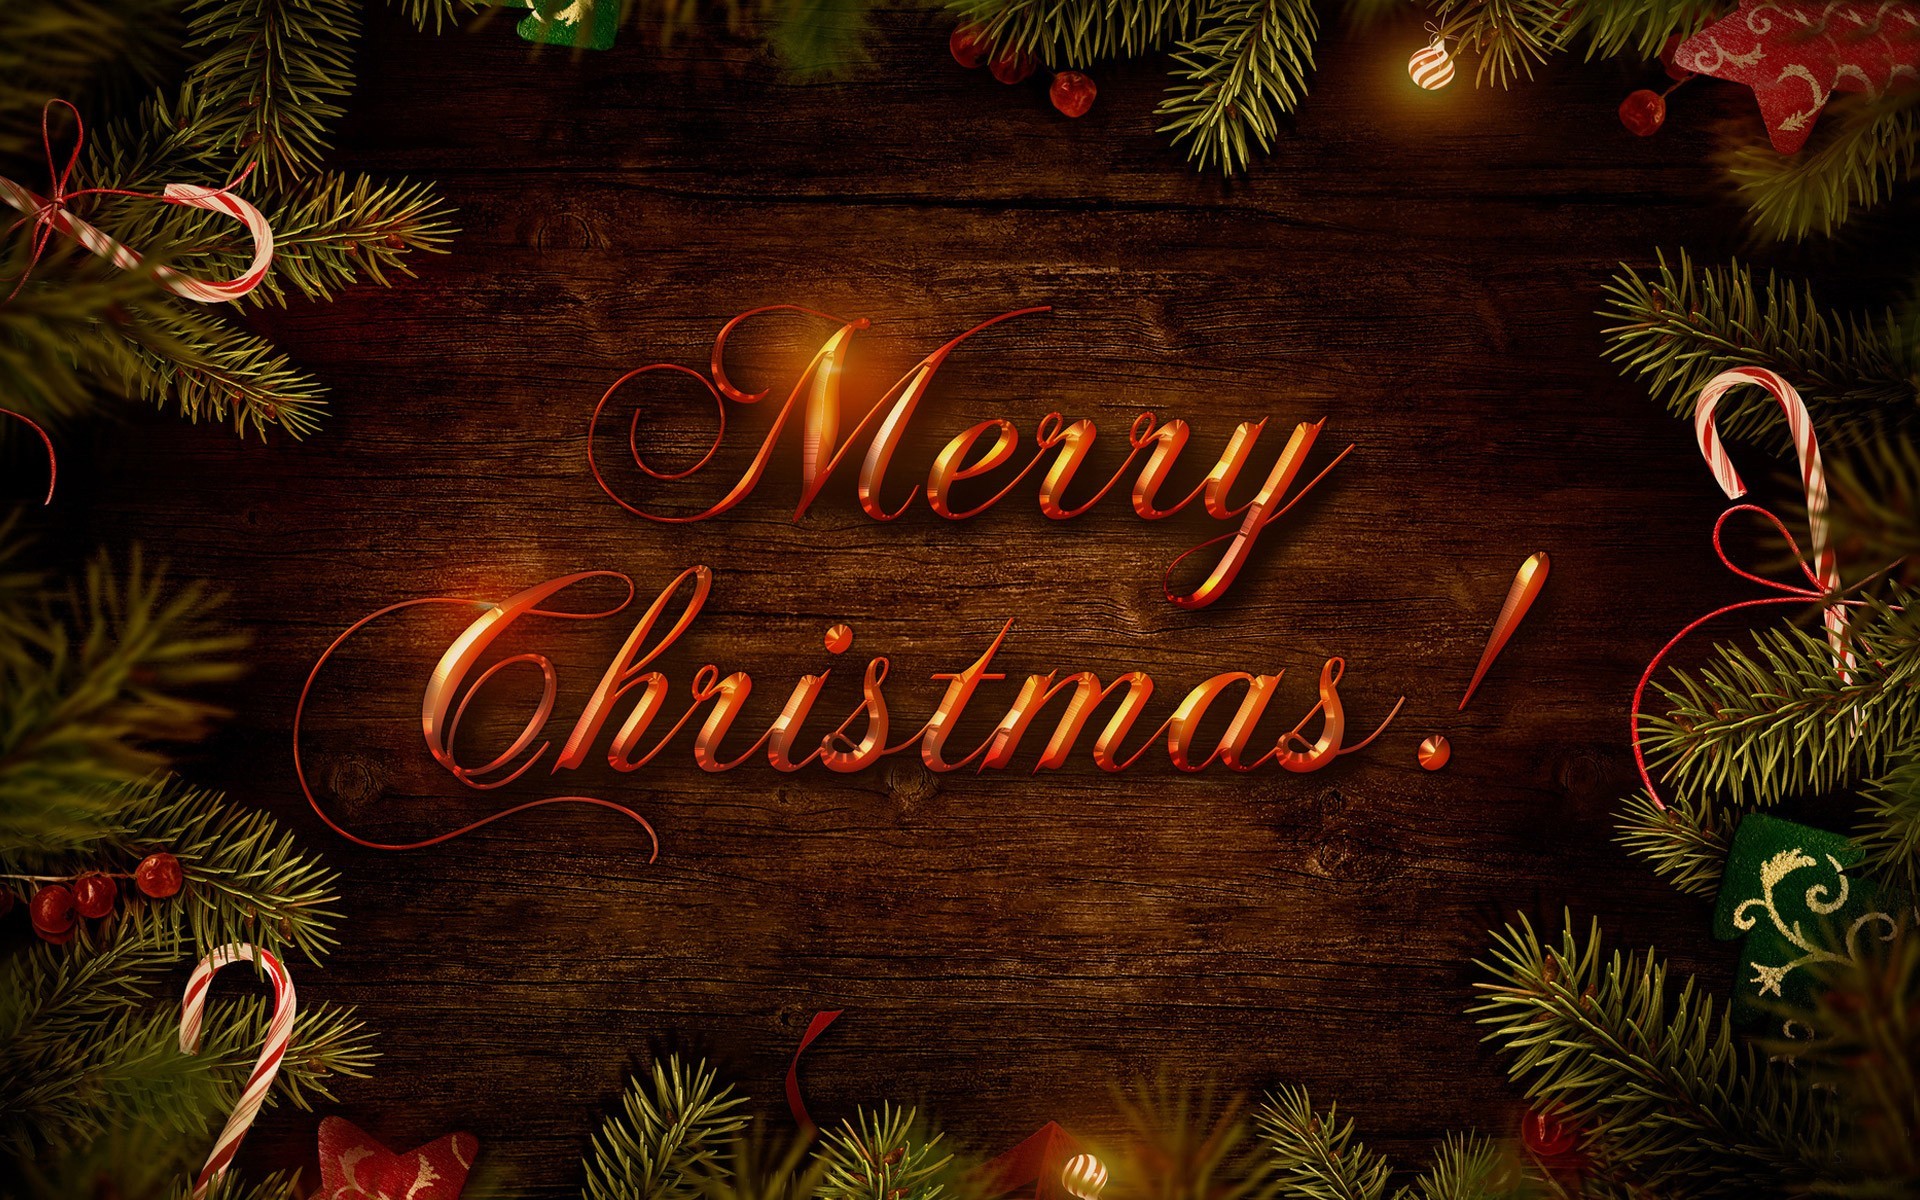 Merry Christmas Wallpapers hd 2015 free · Download ·